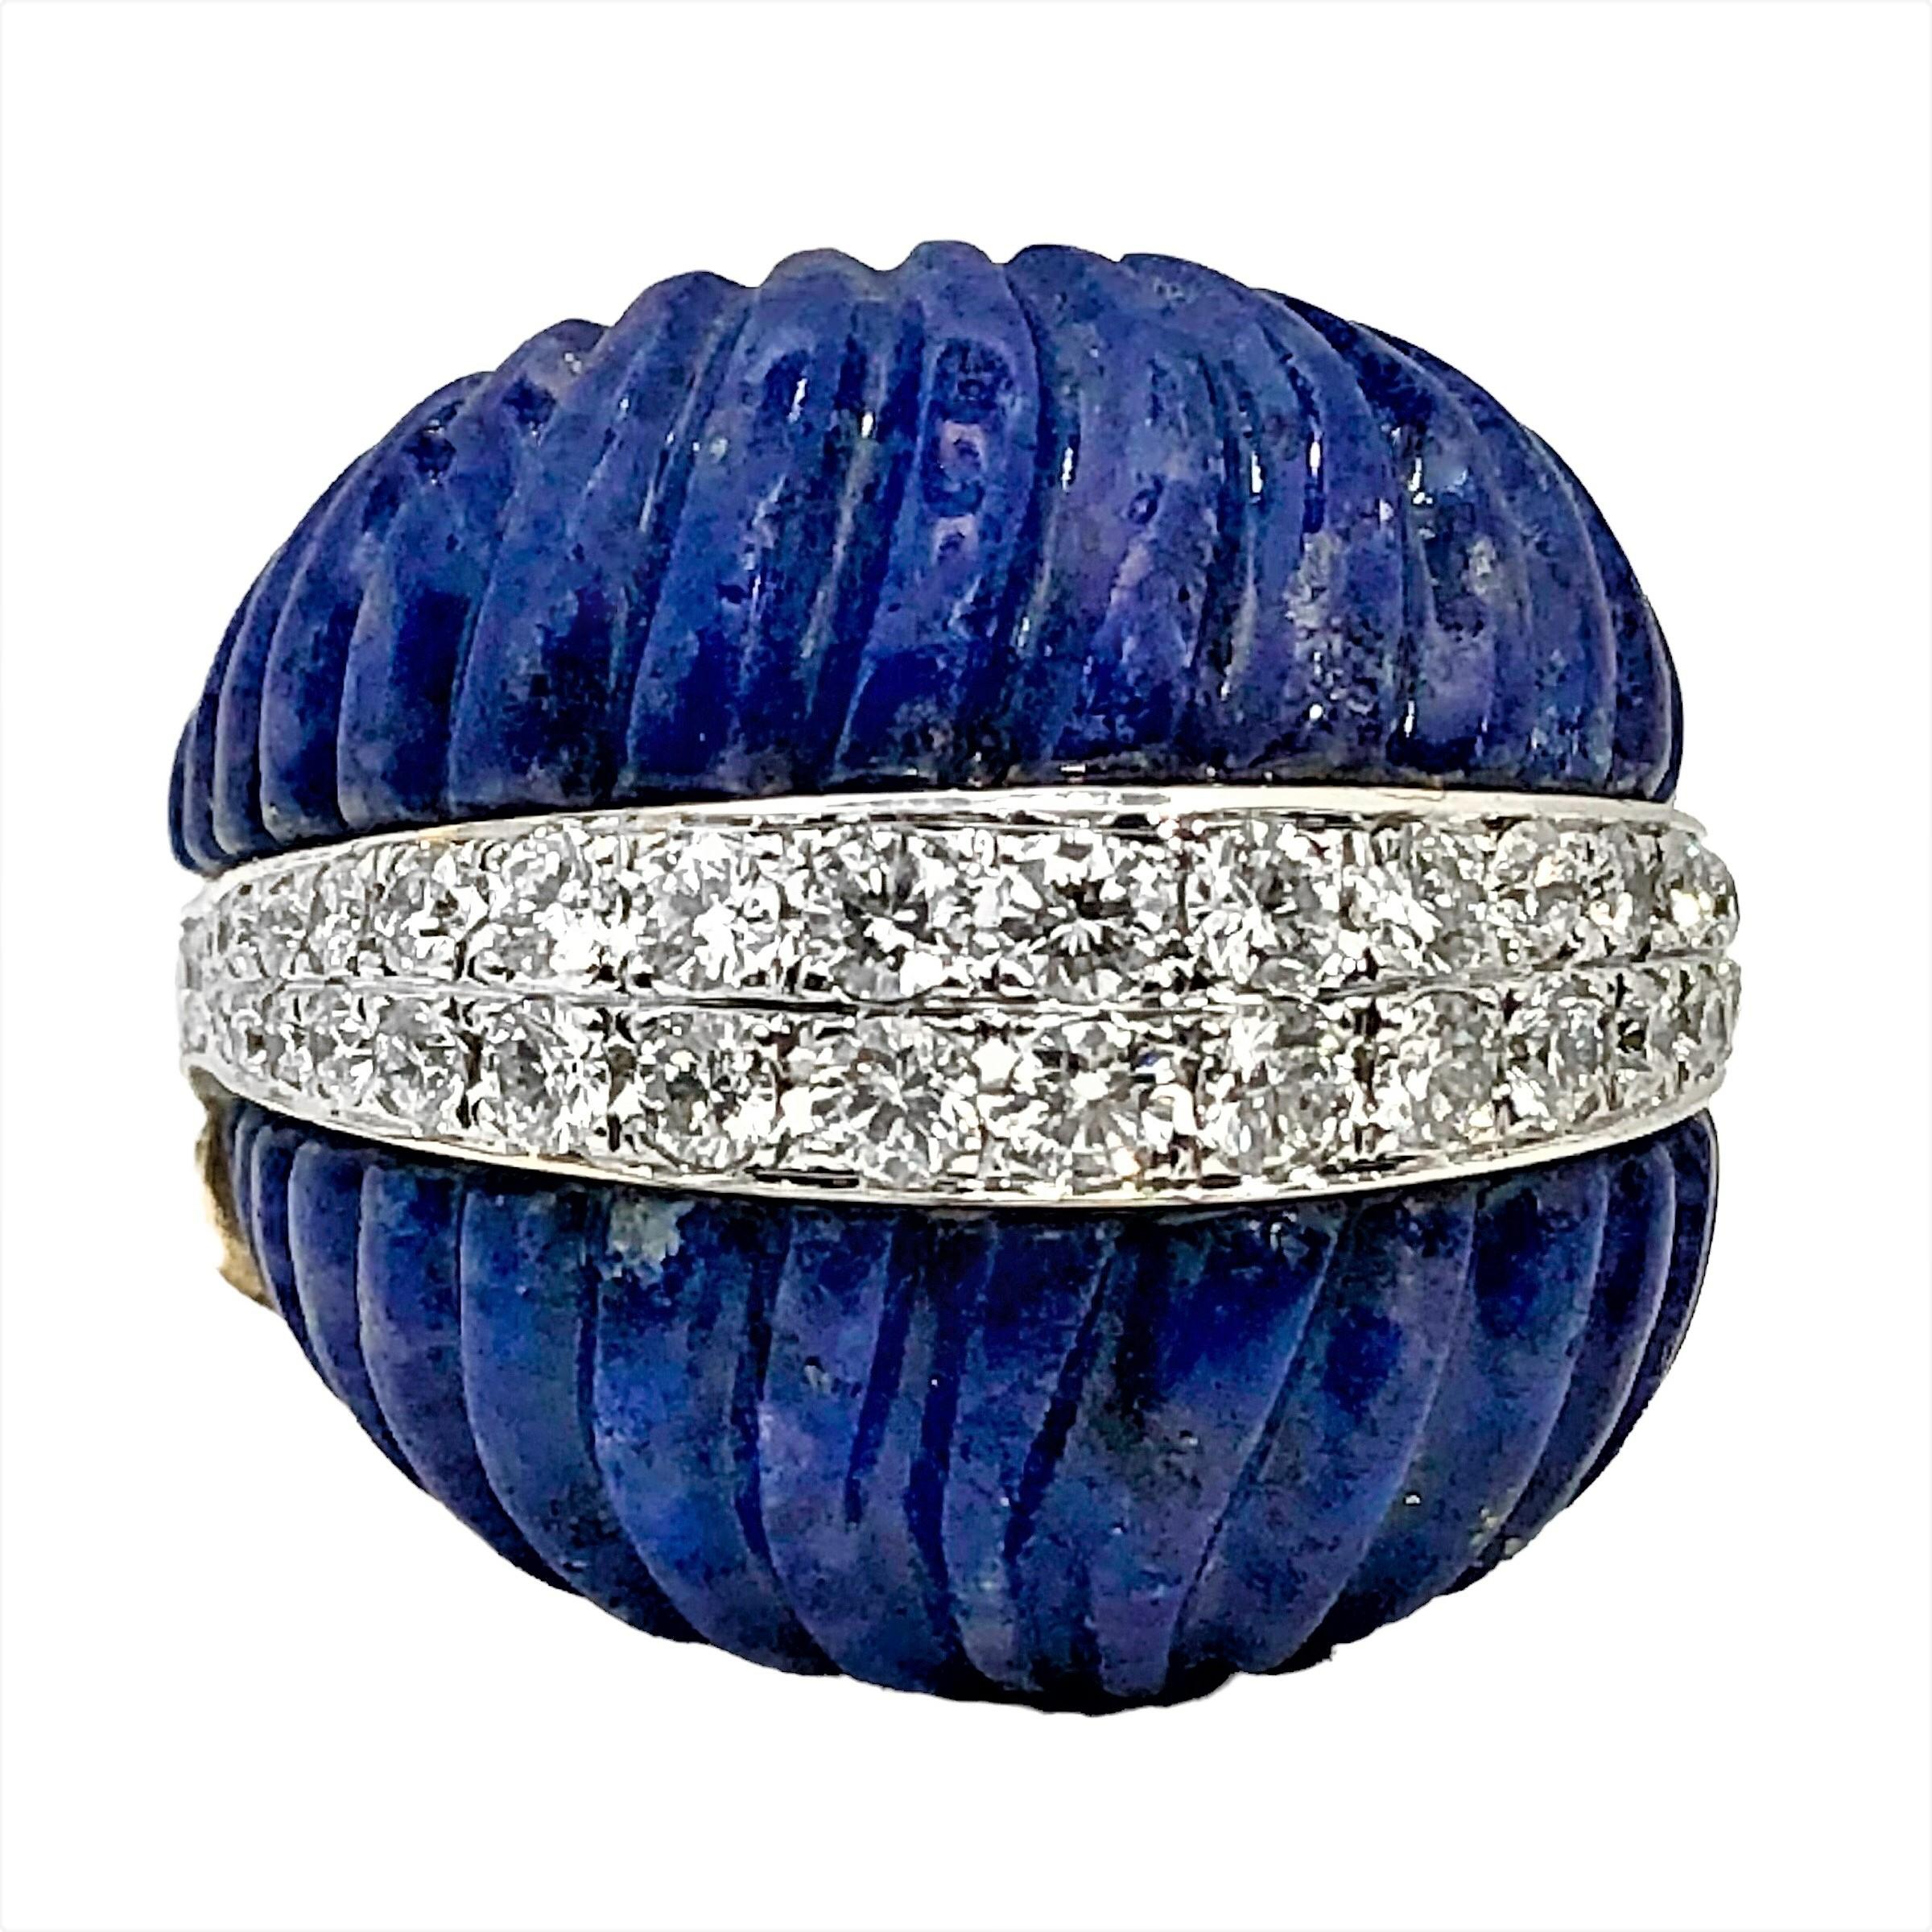 Modern Big and Bold Vintage Yellow Gold, Fluted Lapis-Lazuli and Diamond Dome Ring.